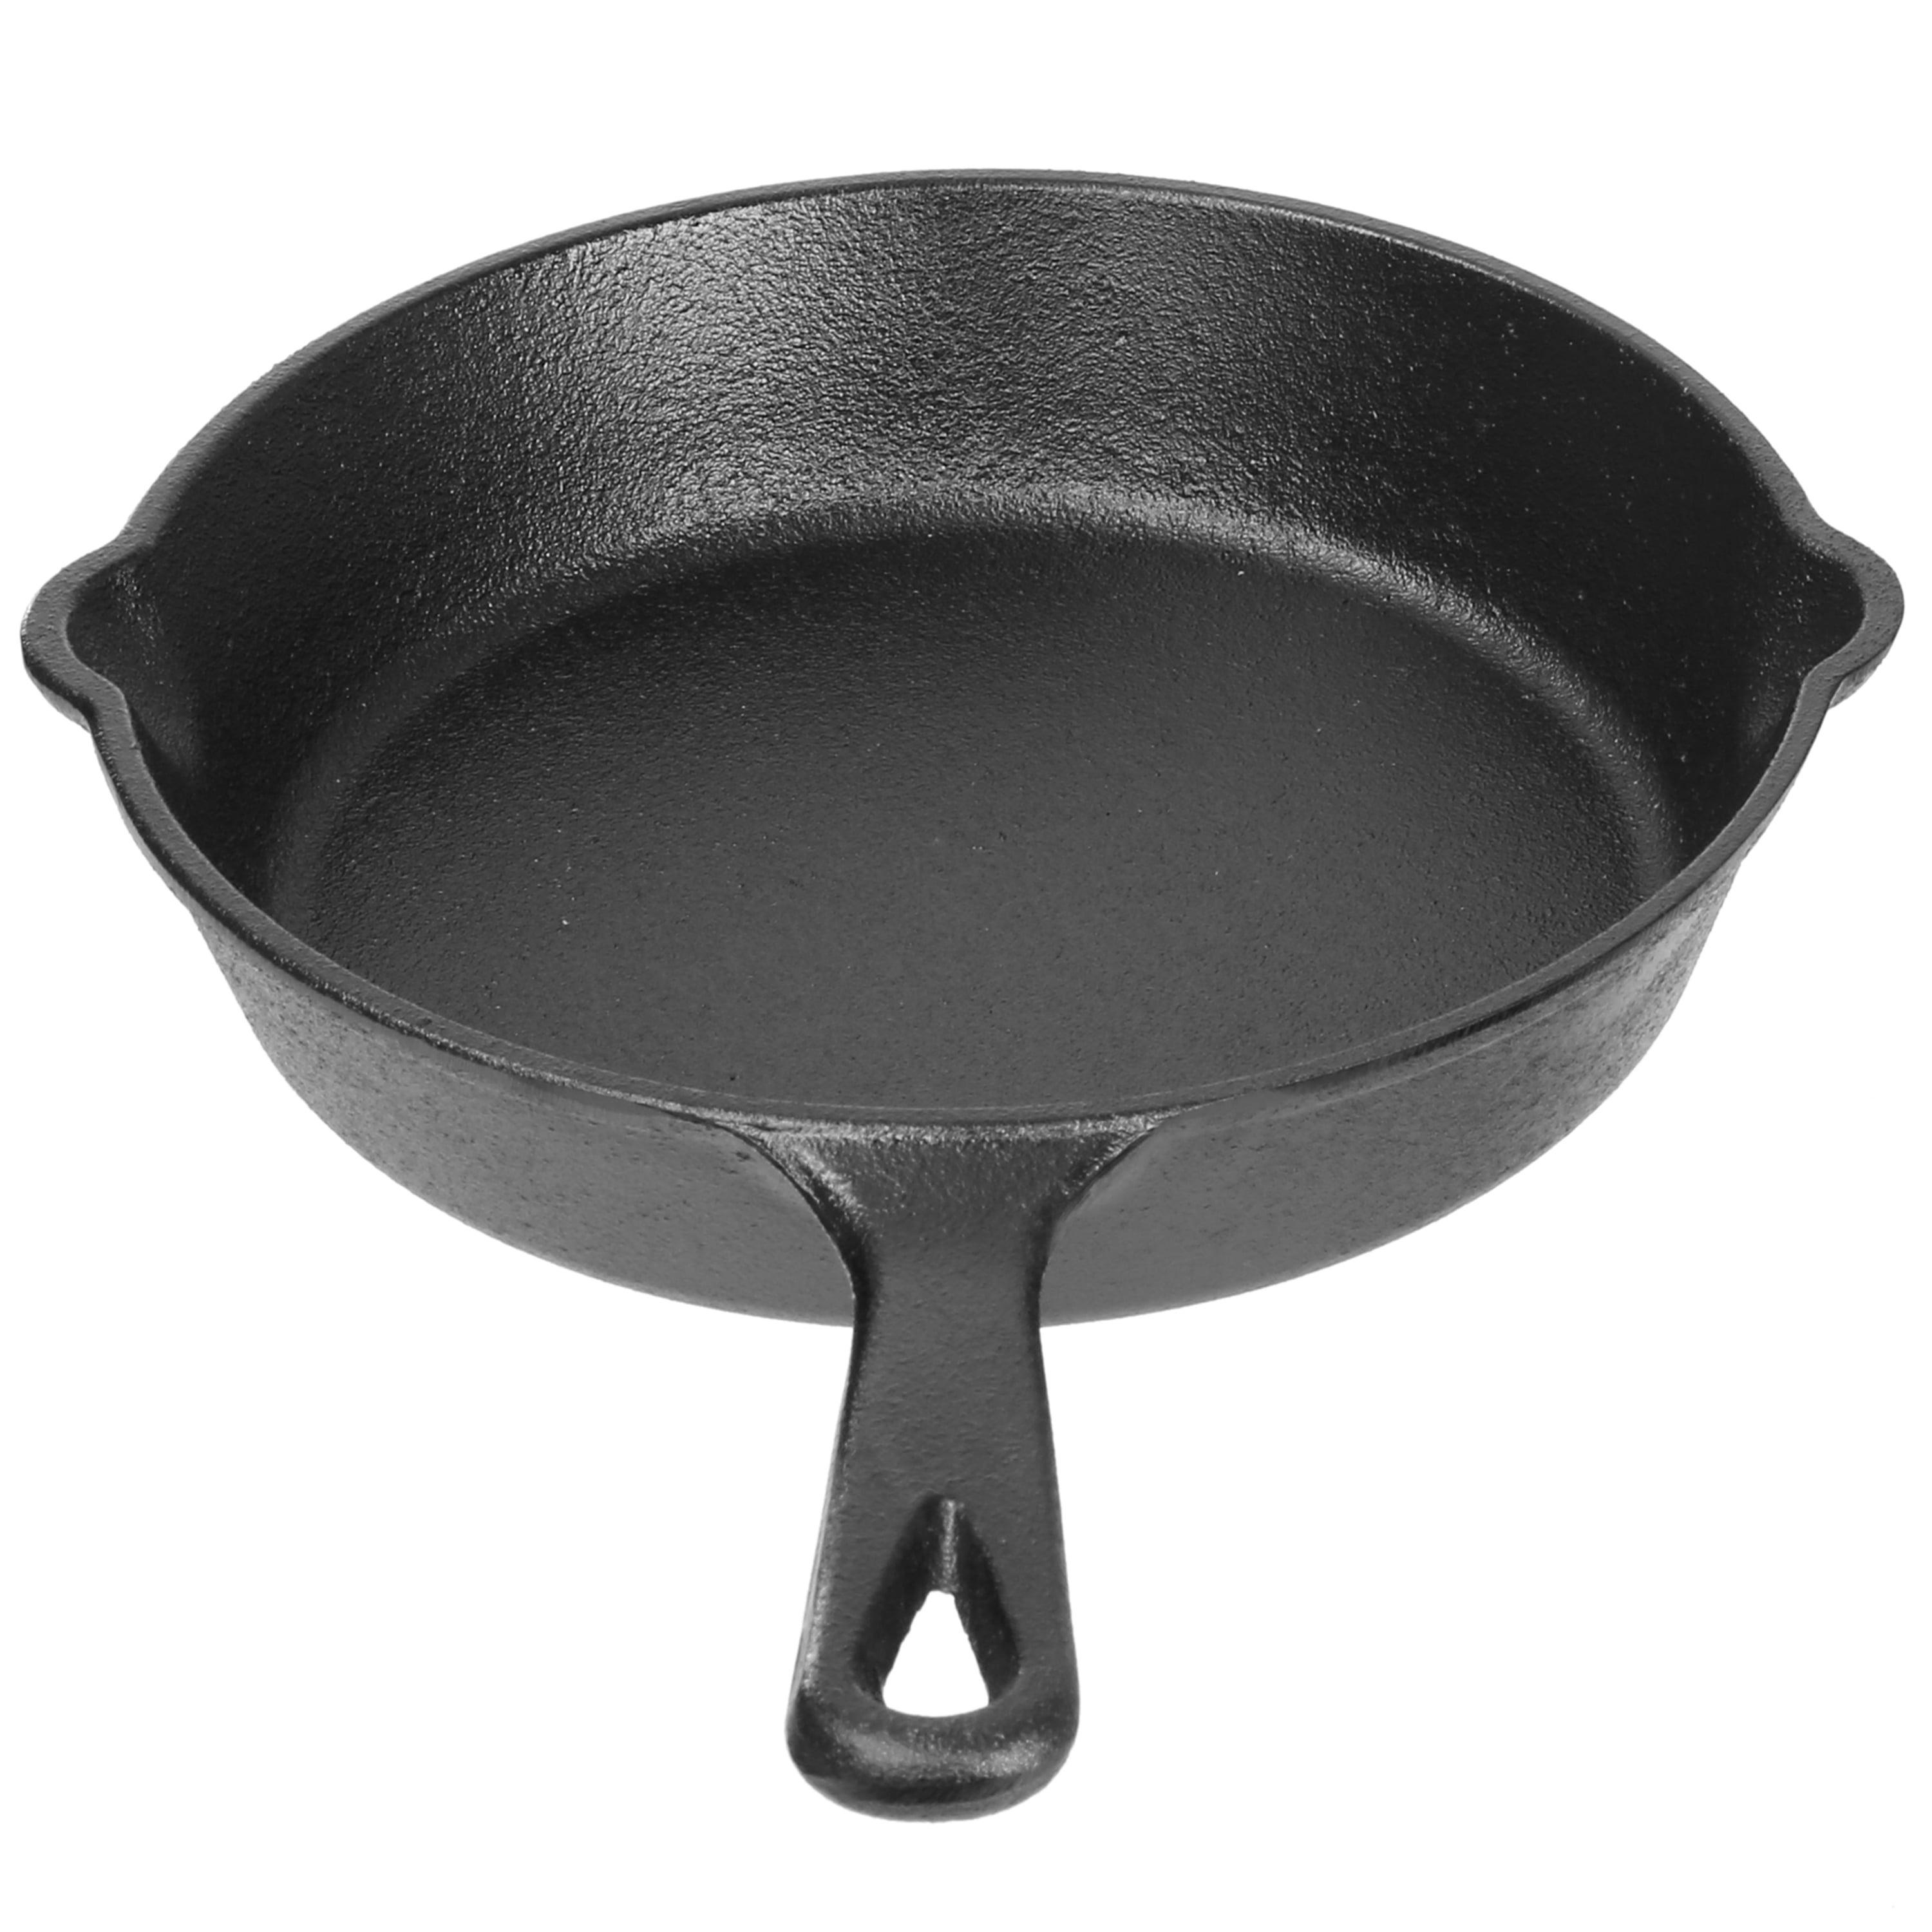 MICHELANGELO Cast Iron Skillet, 10 Inch Cast Iron Skillet With Lid,  Preseasoned Oven Safe Skillet, Iron Skillets for Cooking with Silicone  Handle & Scrapers - 10 Inch 